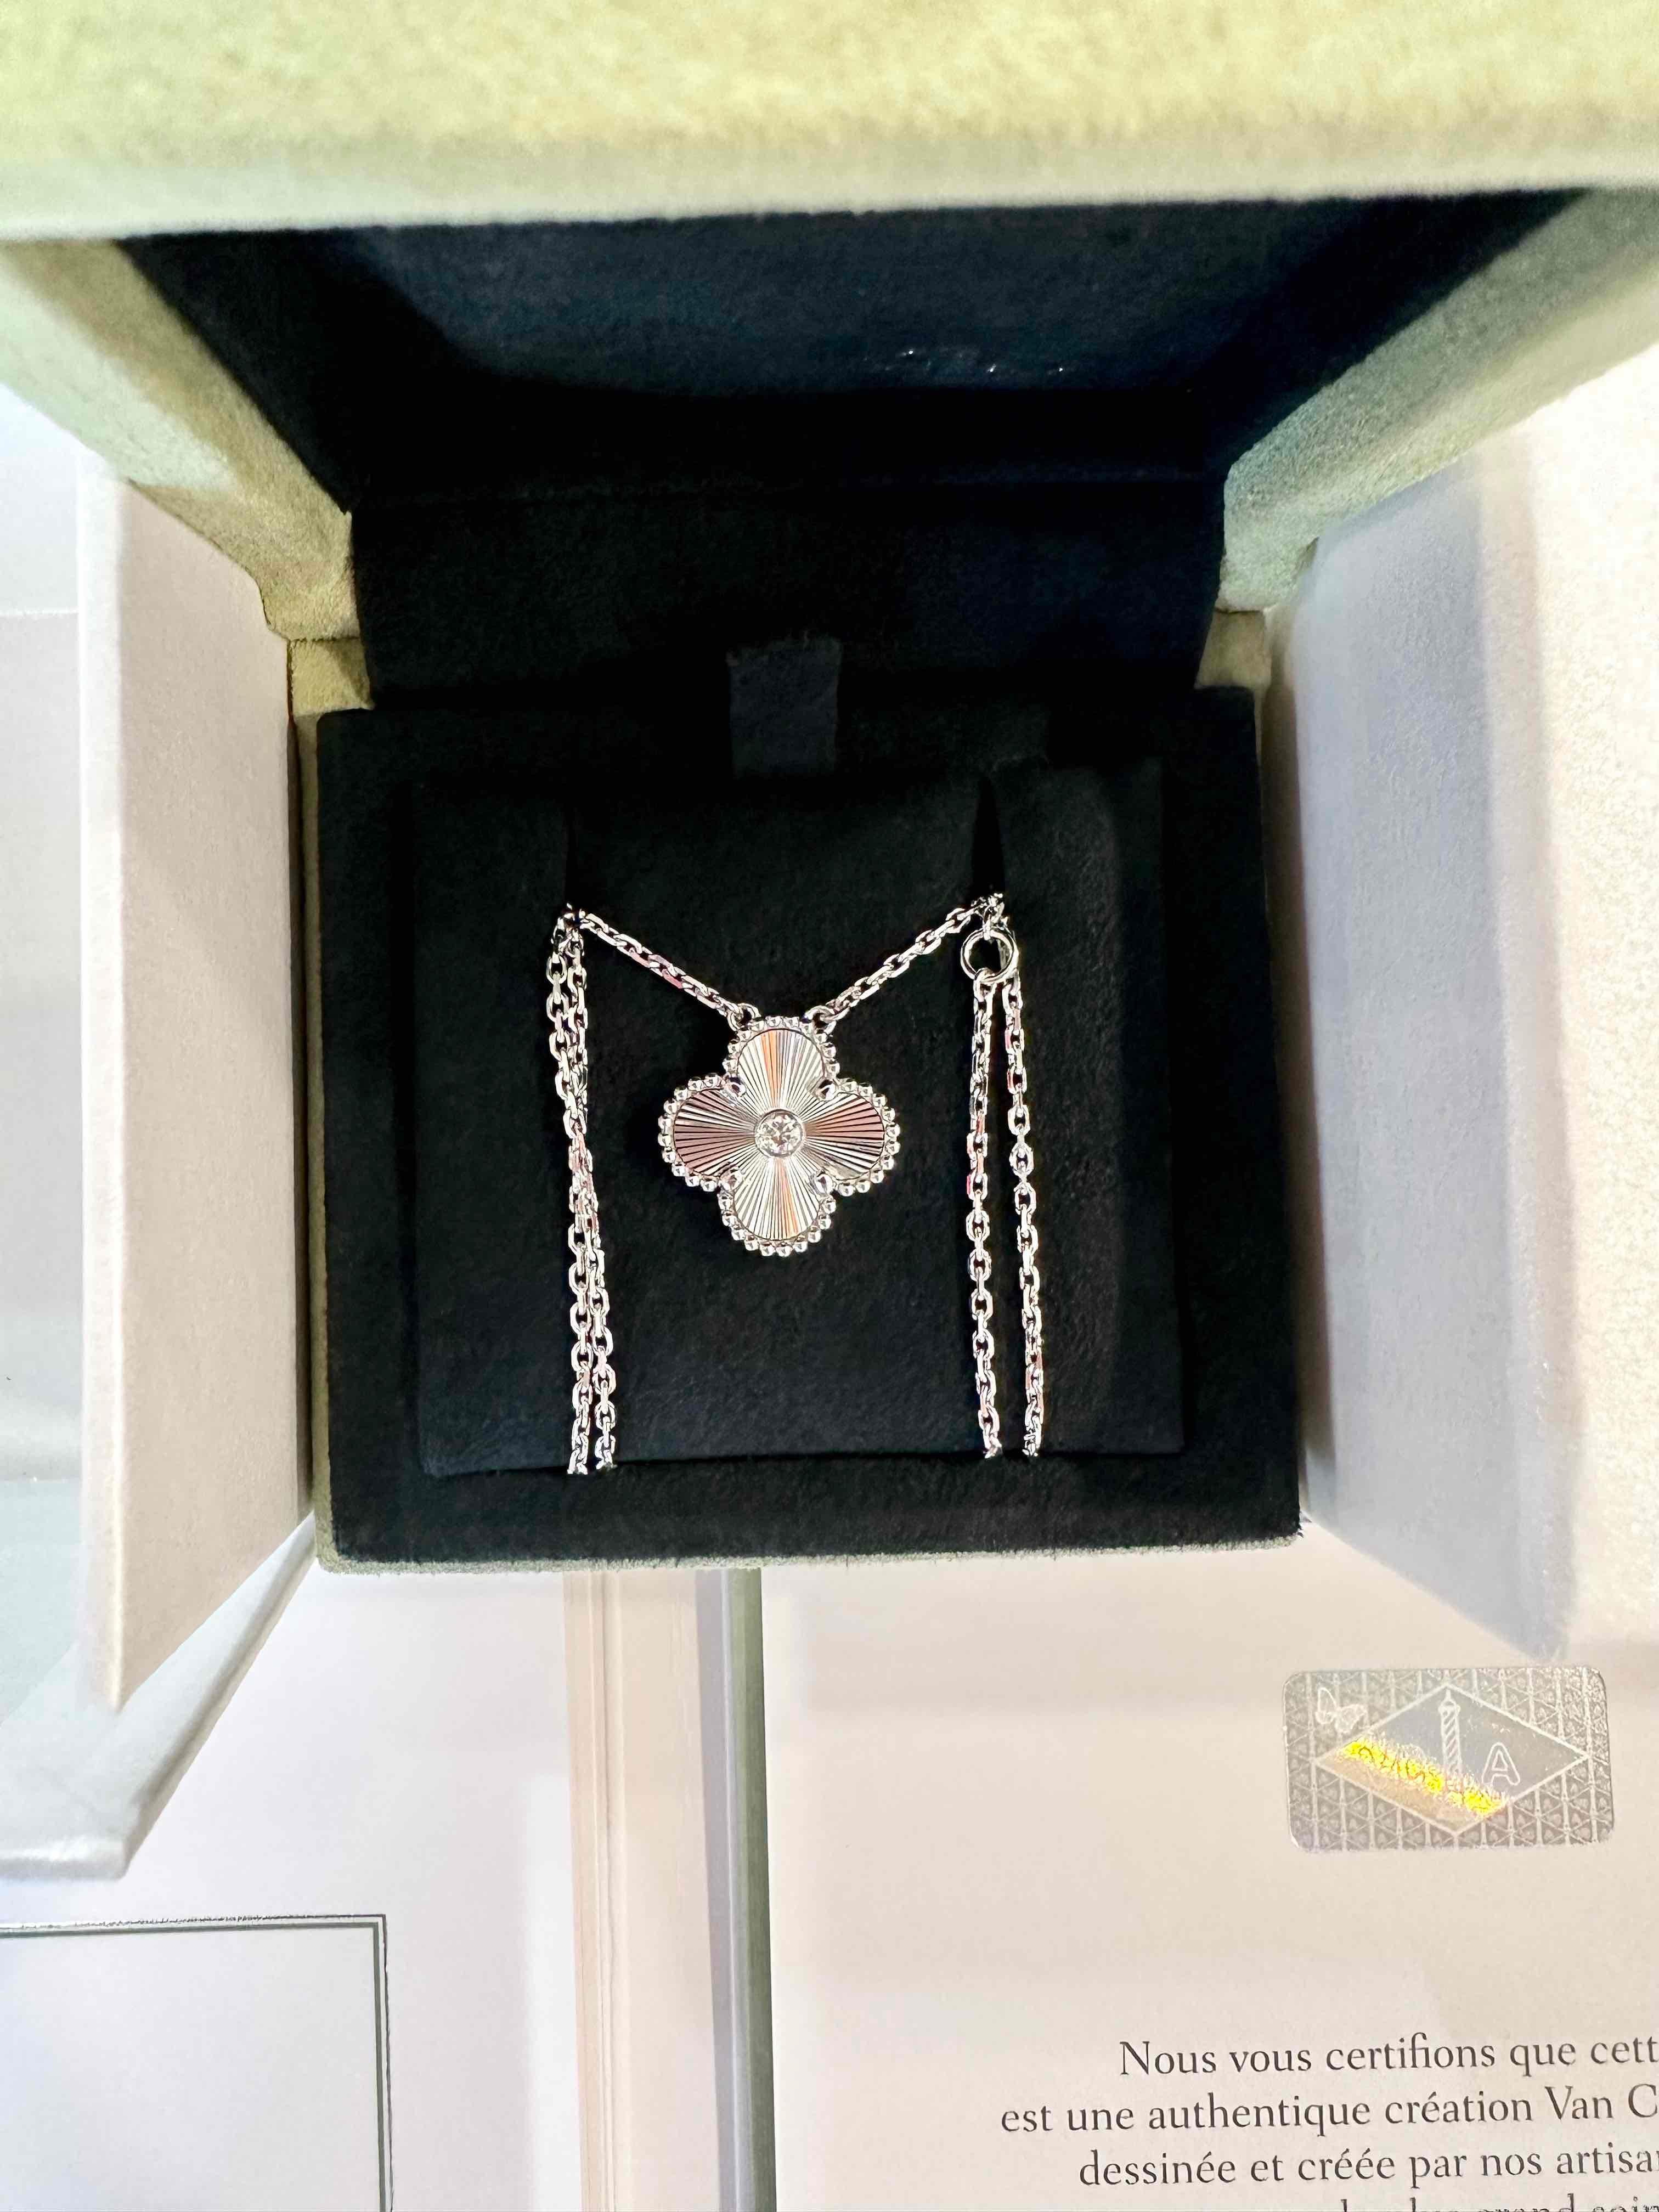 Van Cleef & Arpels 2020 Holiday Pendant of Vintage Alhambra, diamond, guilloche necklace. Discontinued hard to get on the market. 

Maker: Van Cleef & Arpels

Accessories: Boxes, the original certificate dated 2021, and the necklace.

Condition: